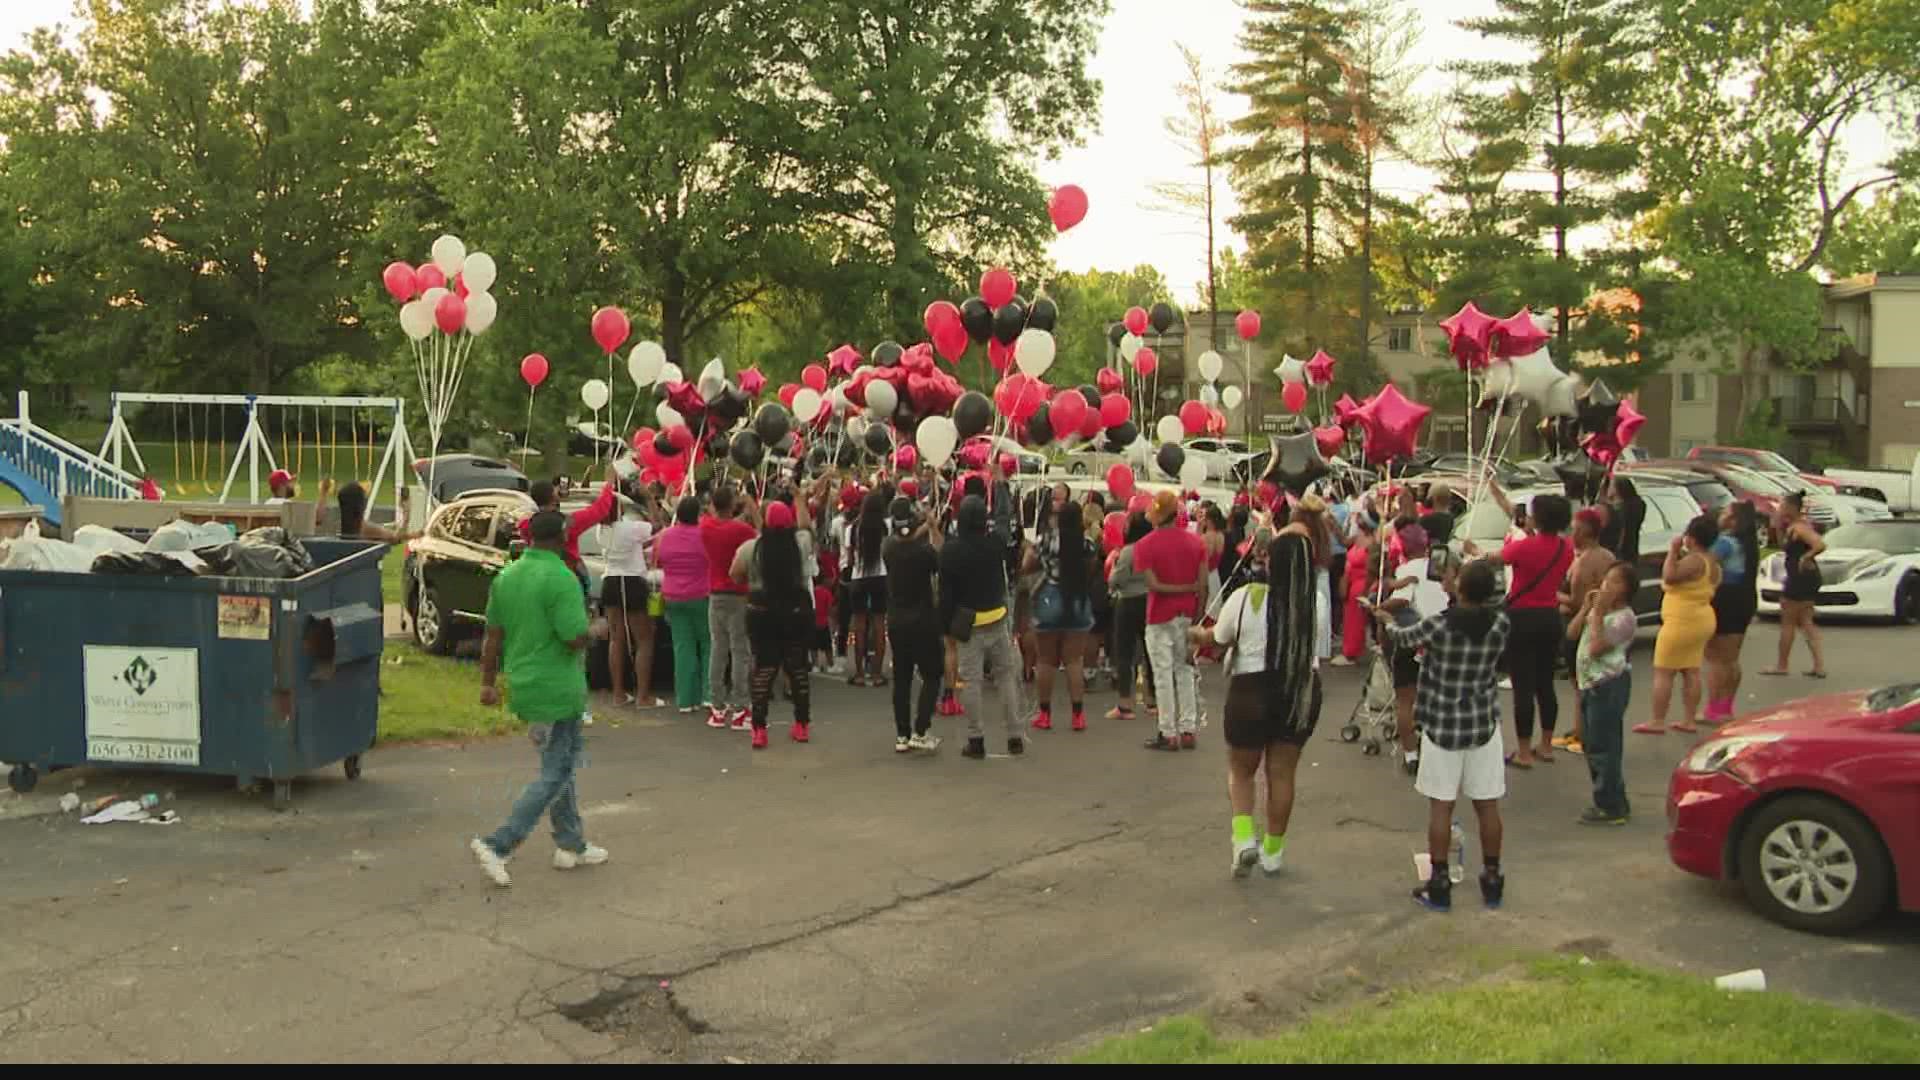 More than 100 people paid their respects during a balloon release for 21-year-old Terrance 'TBaby' Taylor who was shot and killed Sunday.